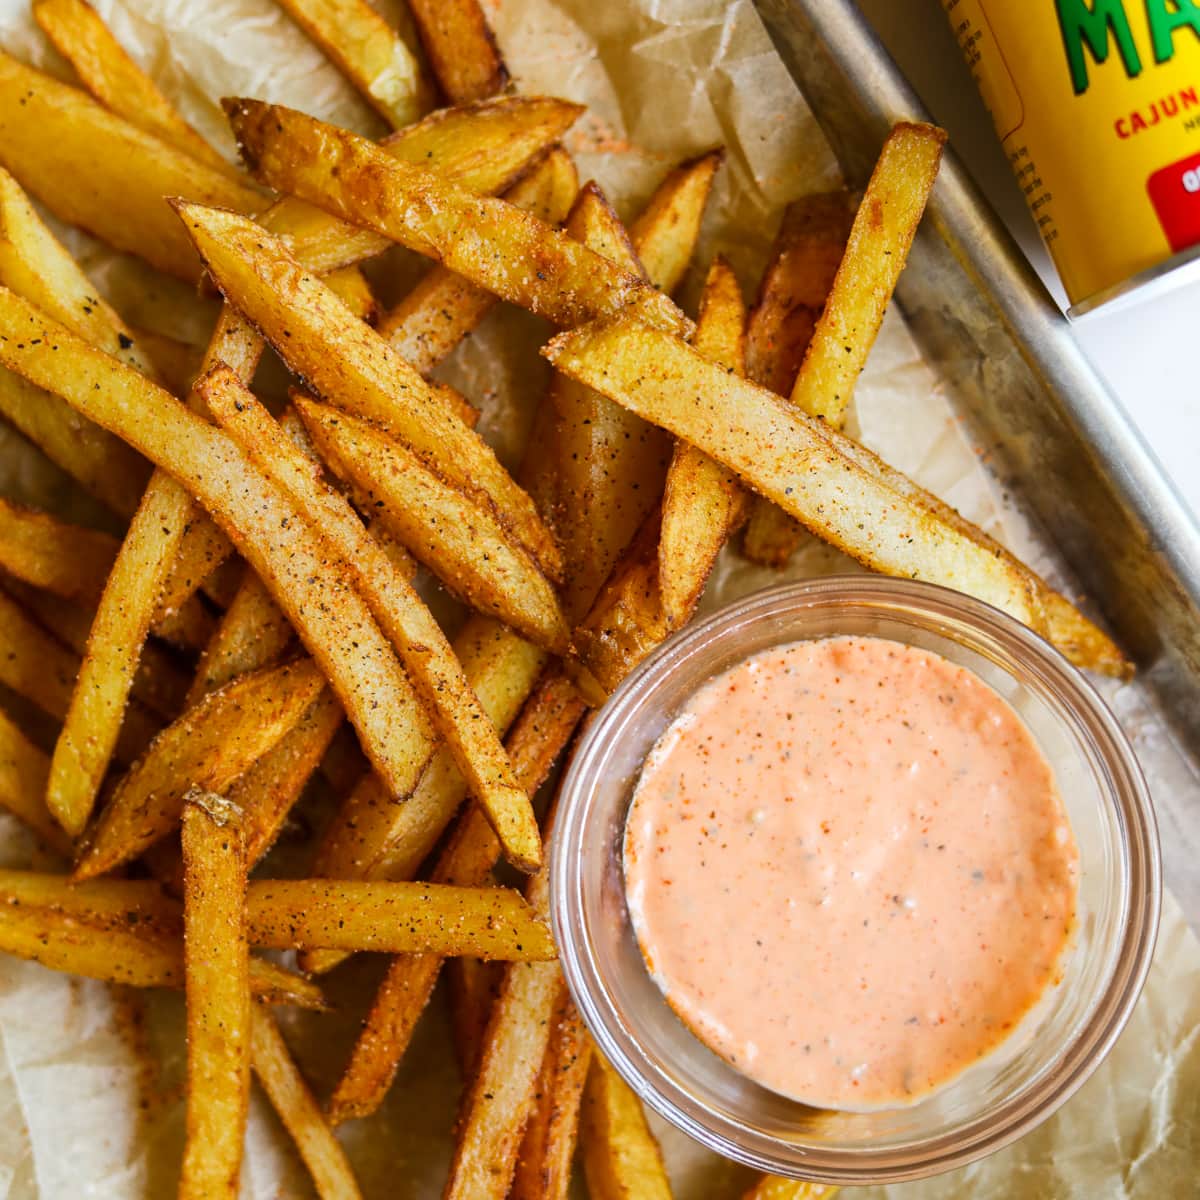 https://theheirloompantry.co/wp-content/uploads/2022/06/spicy-cajun-fries-with-sriracha-aioli-the-heirloom-pantry-04.jpg